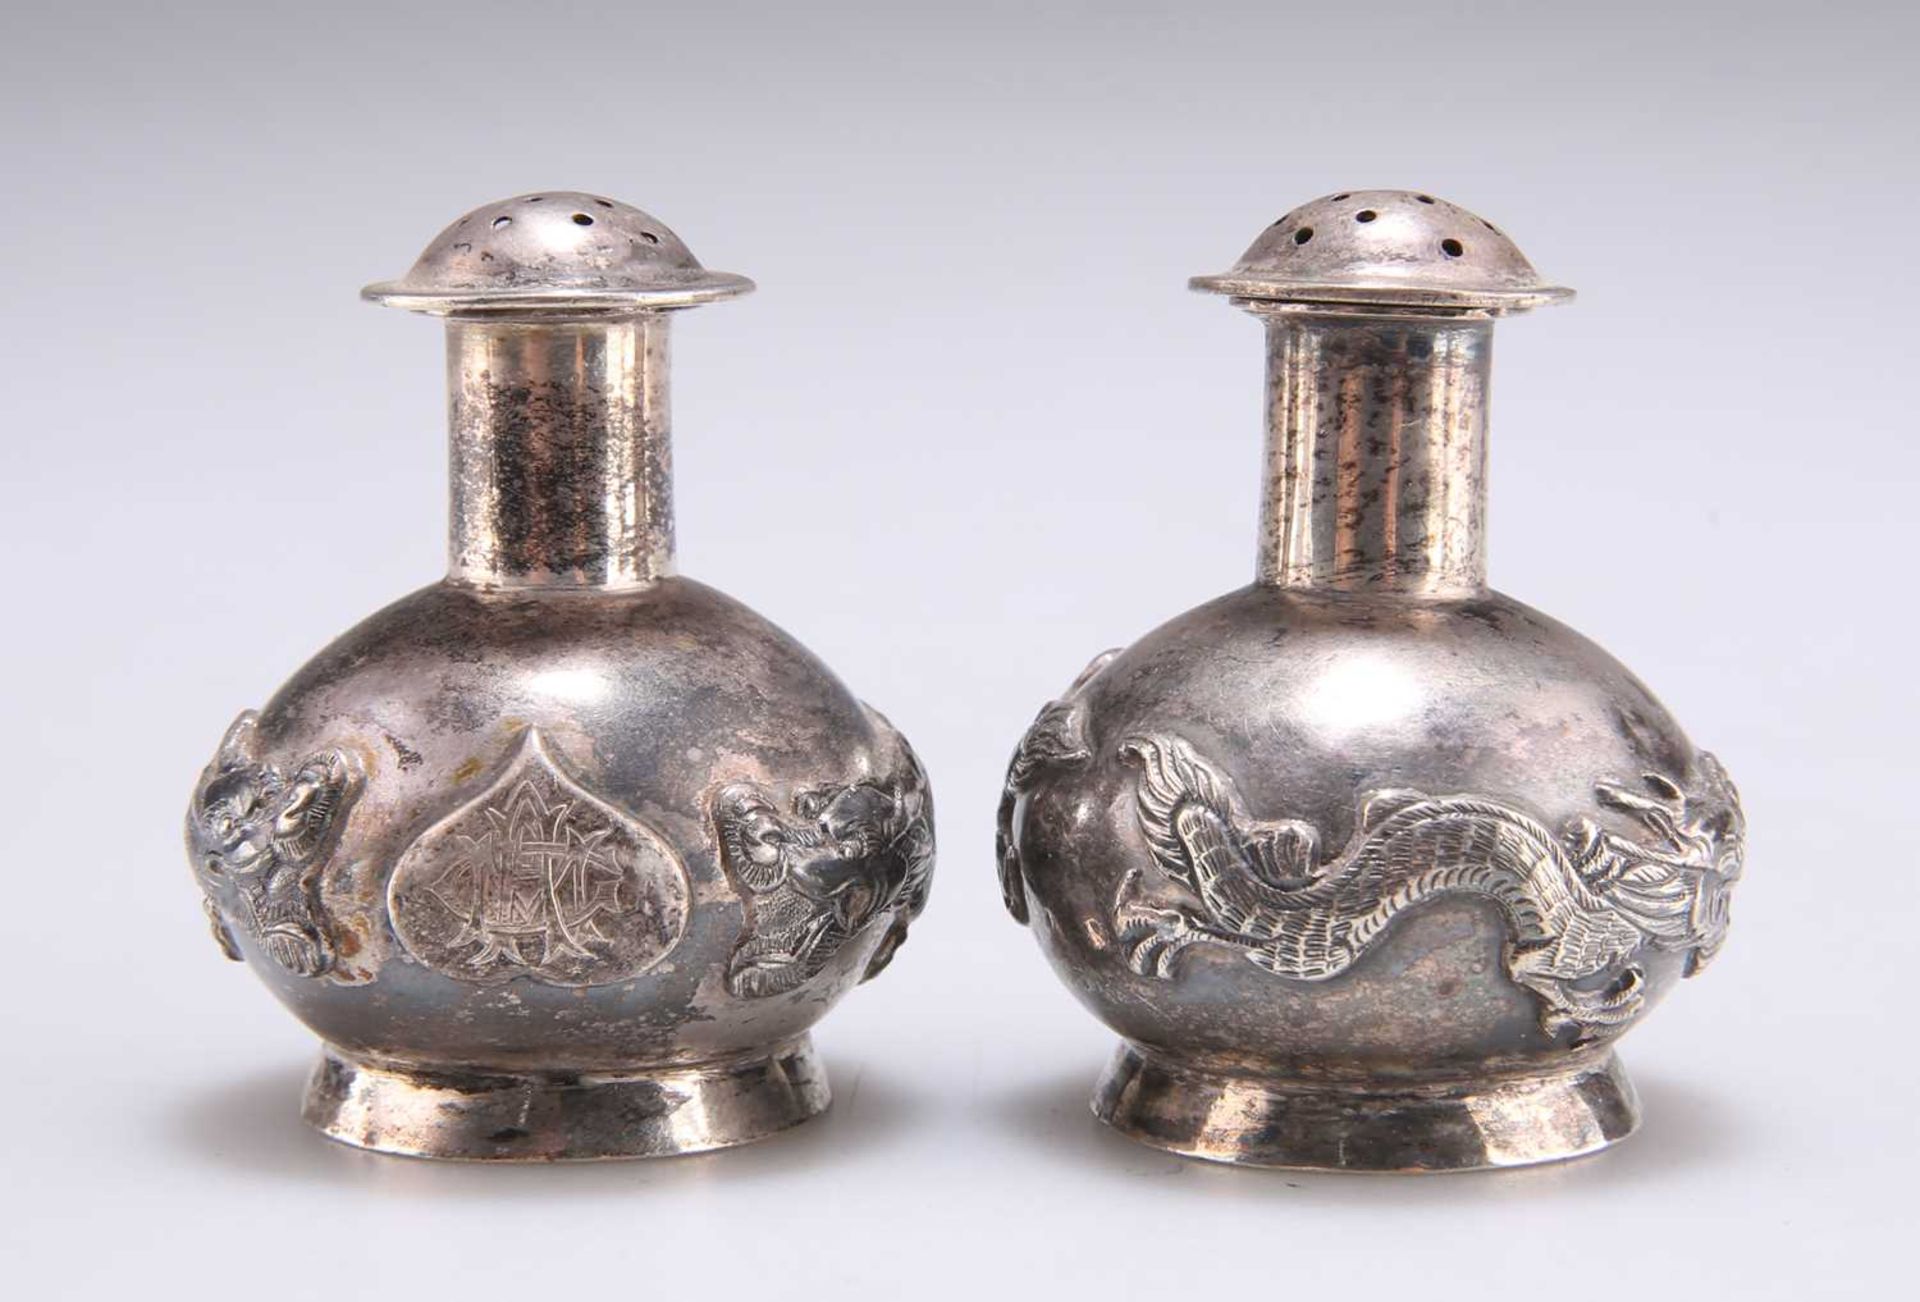 A PAIR OF 19TH CENTURY CHINESE SILVER PEPPER POTS